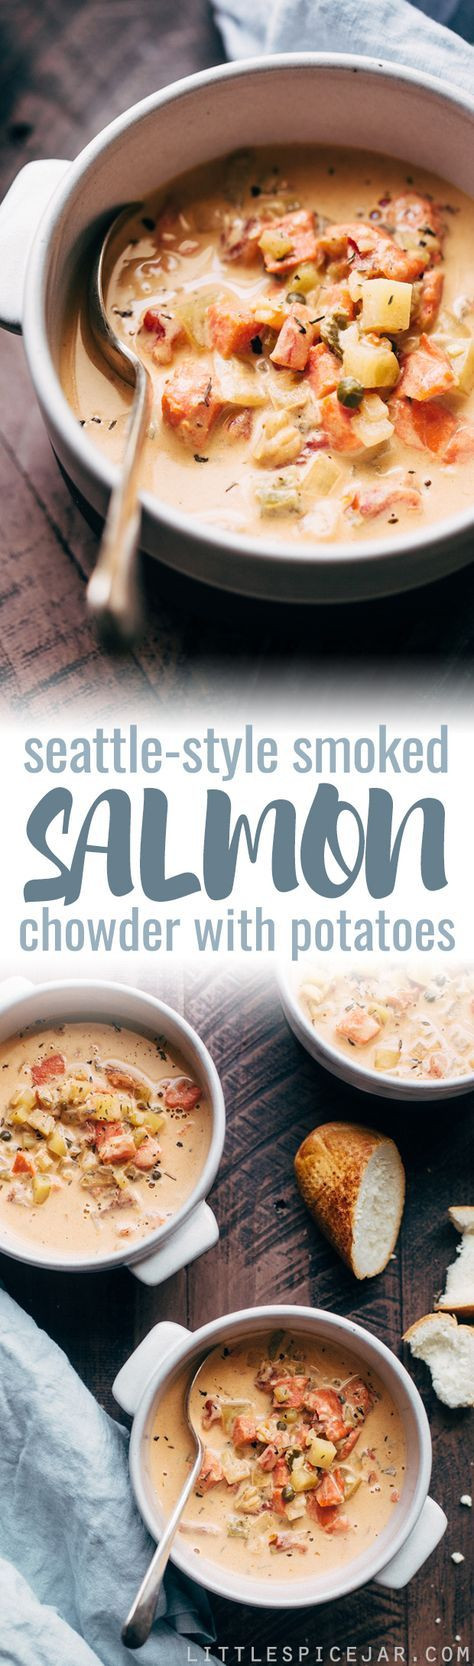 Best Smoked Salmon Seattle
 73 best Soy Sides images on Pinterest